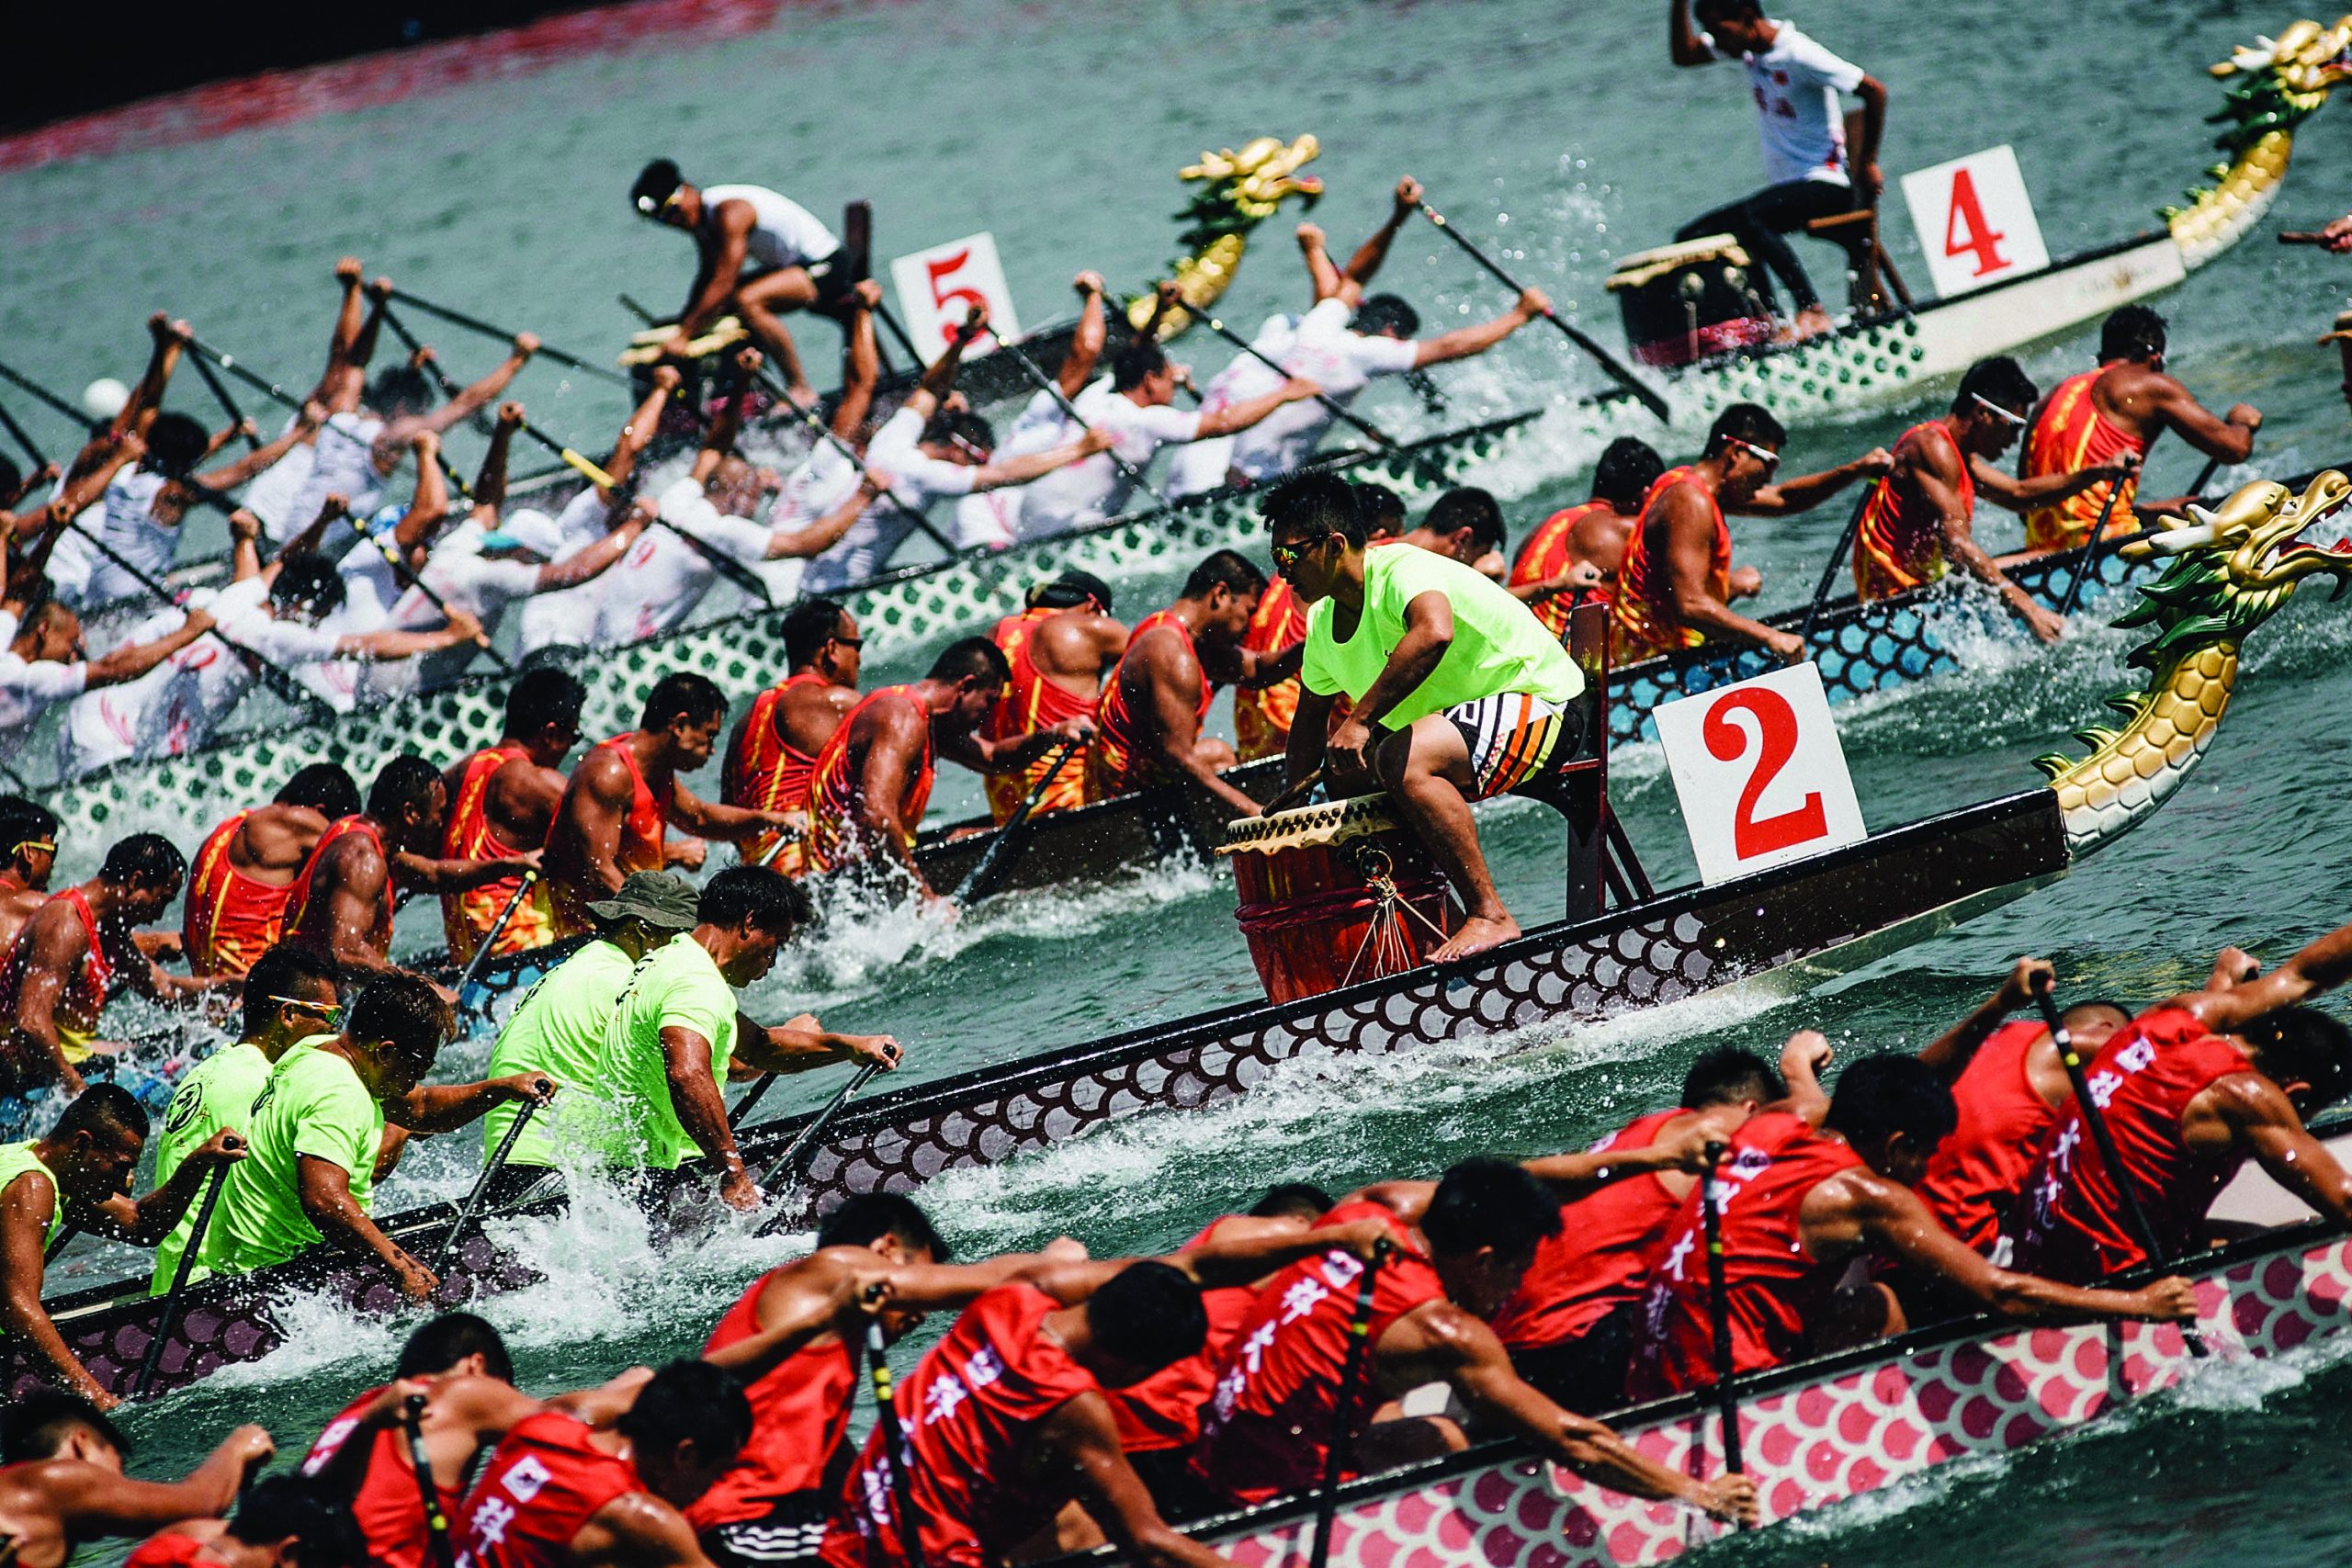 Hong Kong most popular festivals and events HKTB Dragon Boat Carnival scaled